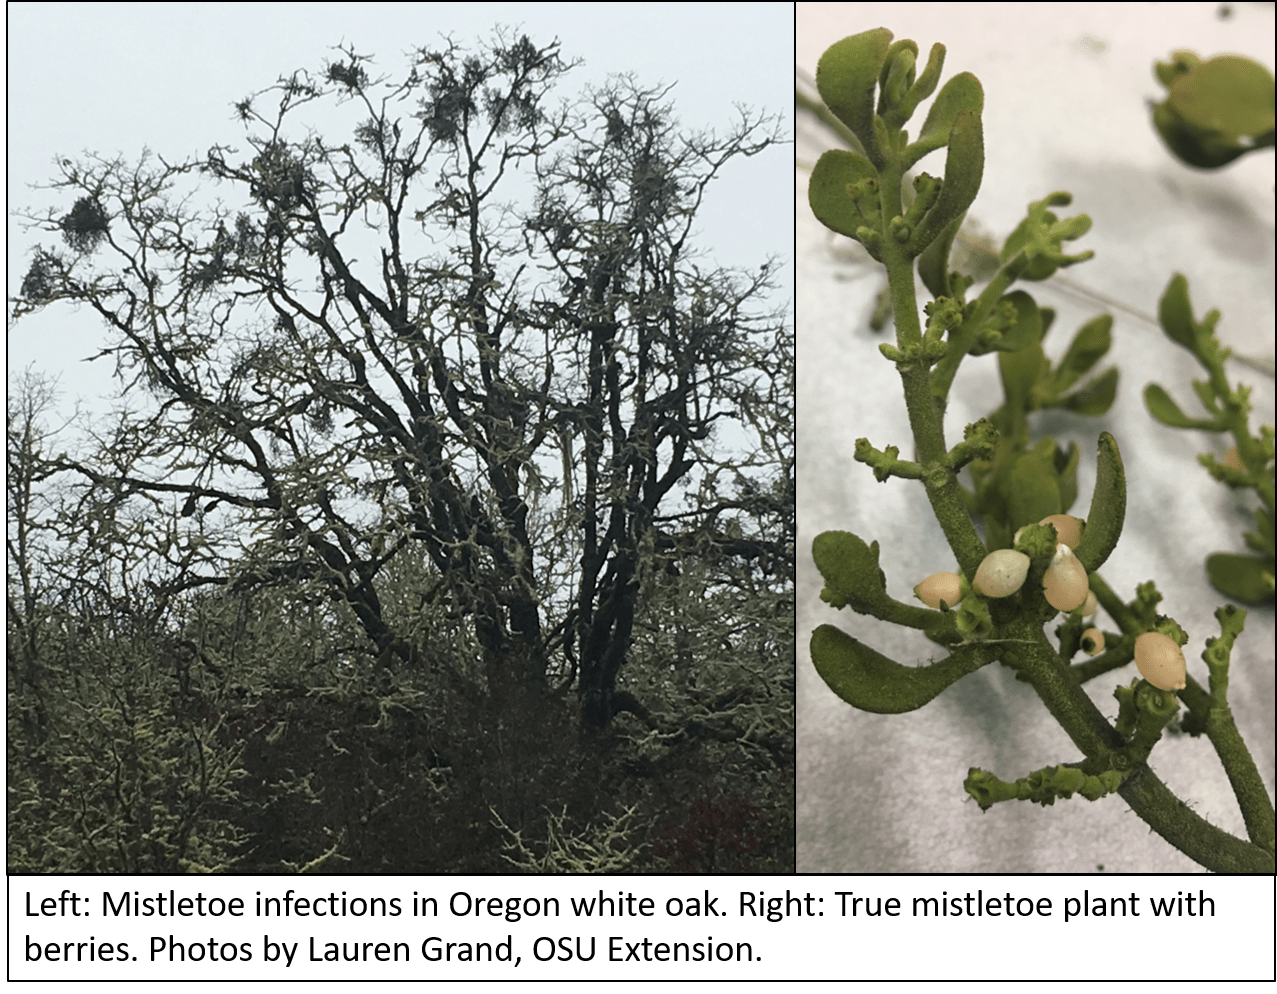 Side-by-side photos show an Oregon white oak infected with mistletoe, and a close-up view of a true mistletoe plant with